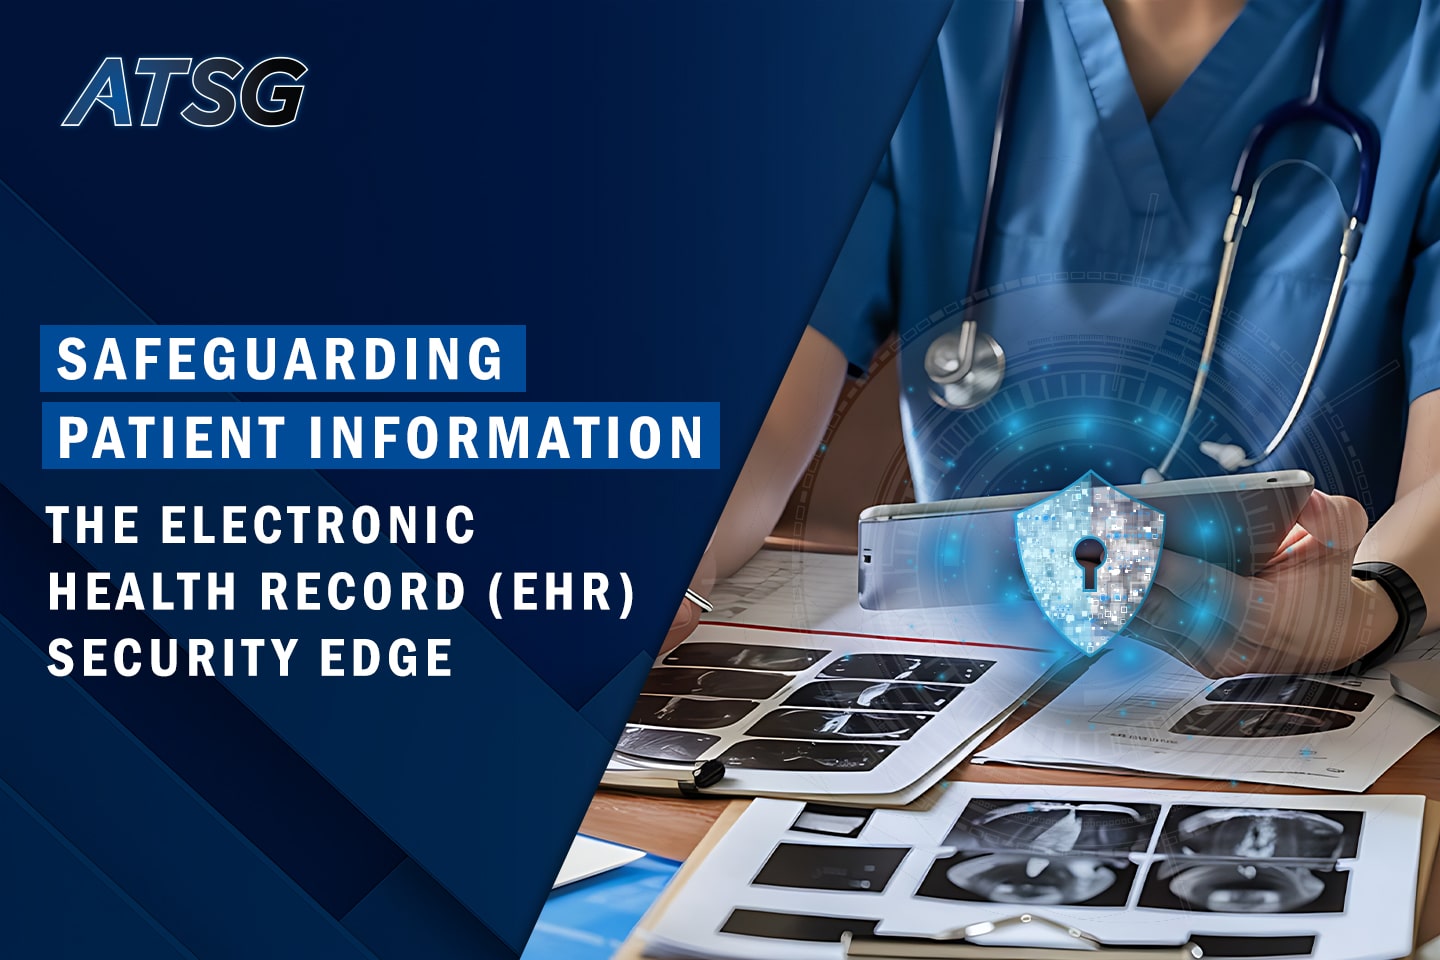 Safeguarding-Patient-Information-The-Electronic-Health-Record-Security-Edge-Featured